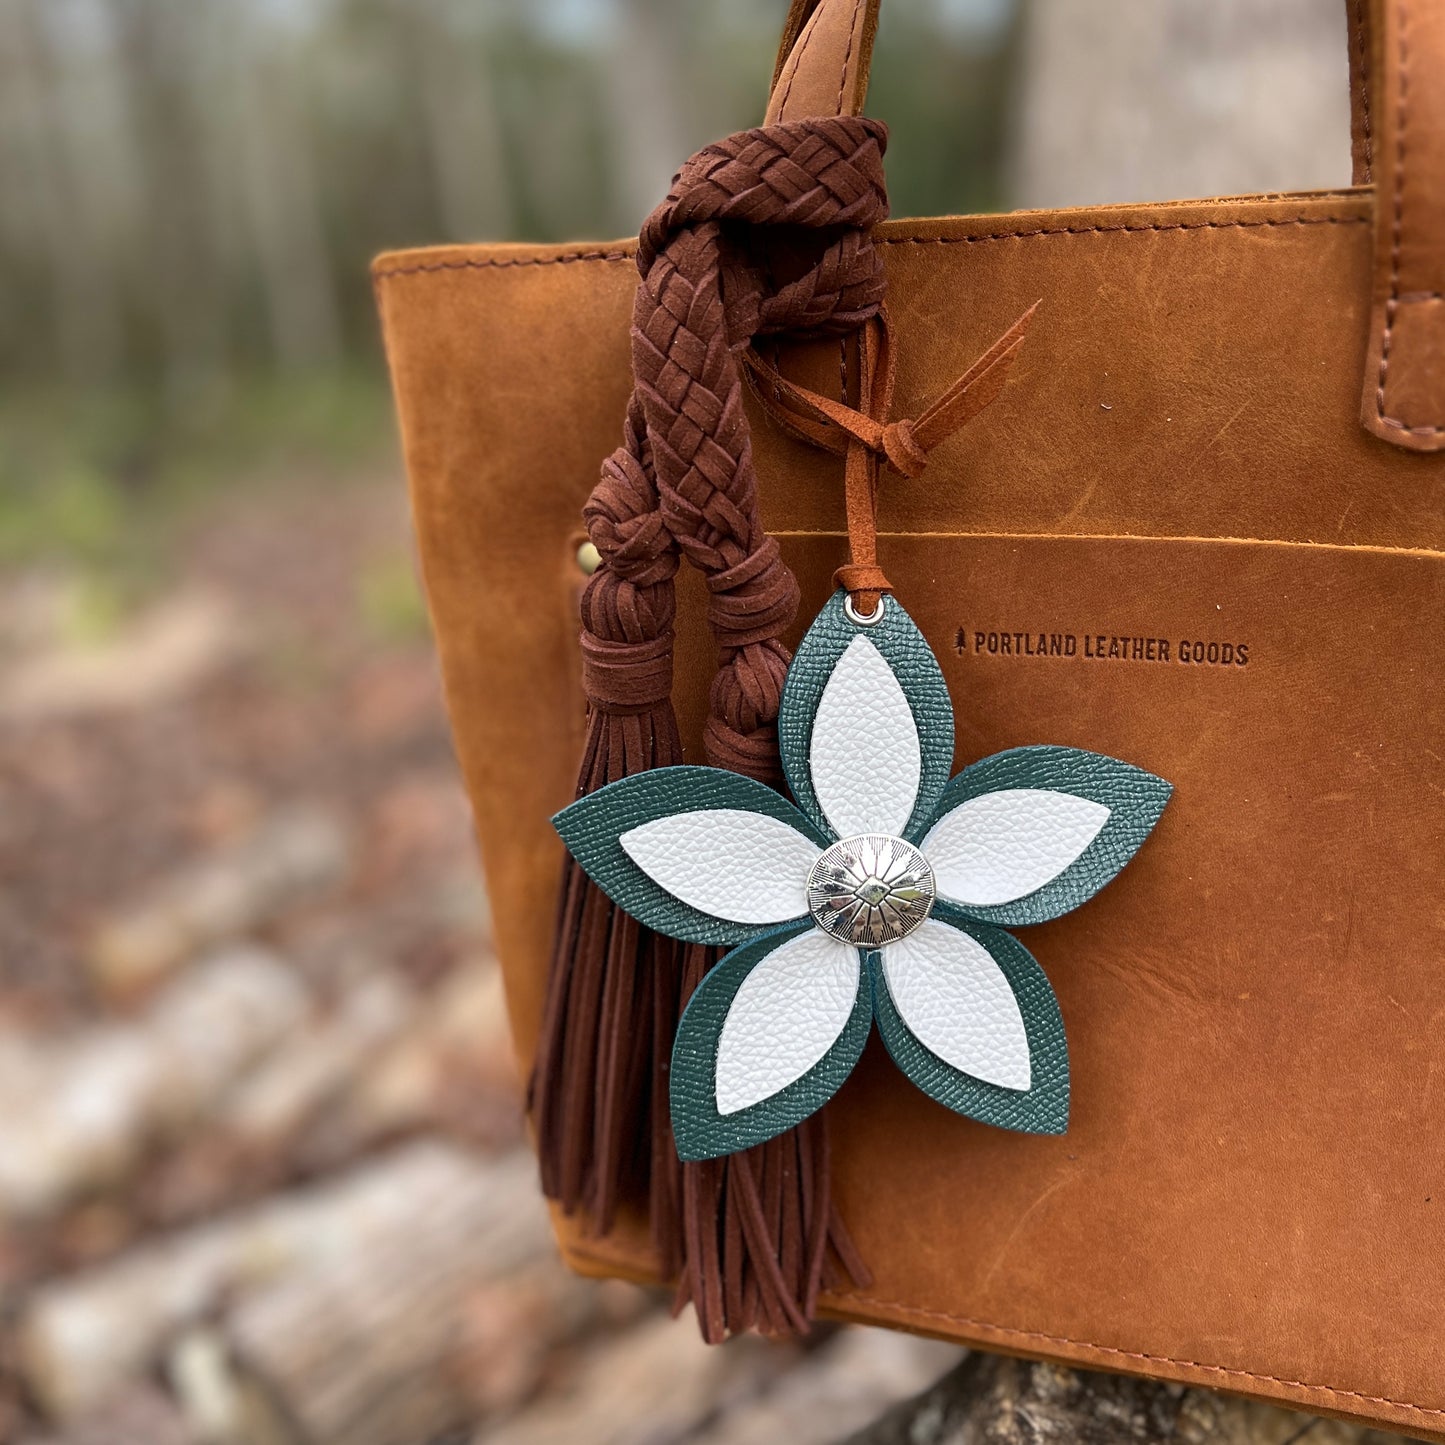 Leather Flower Bag Charm - Large Flower with Loop - Teal and White